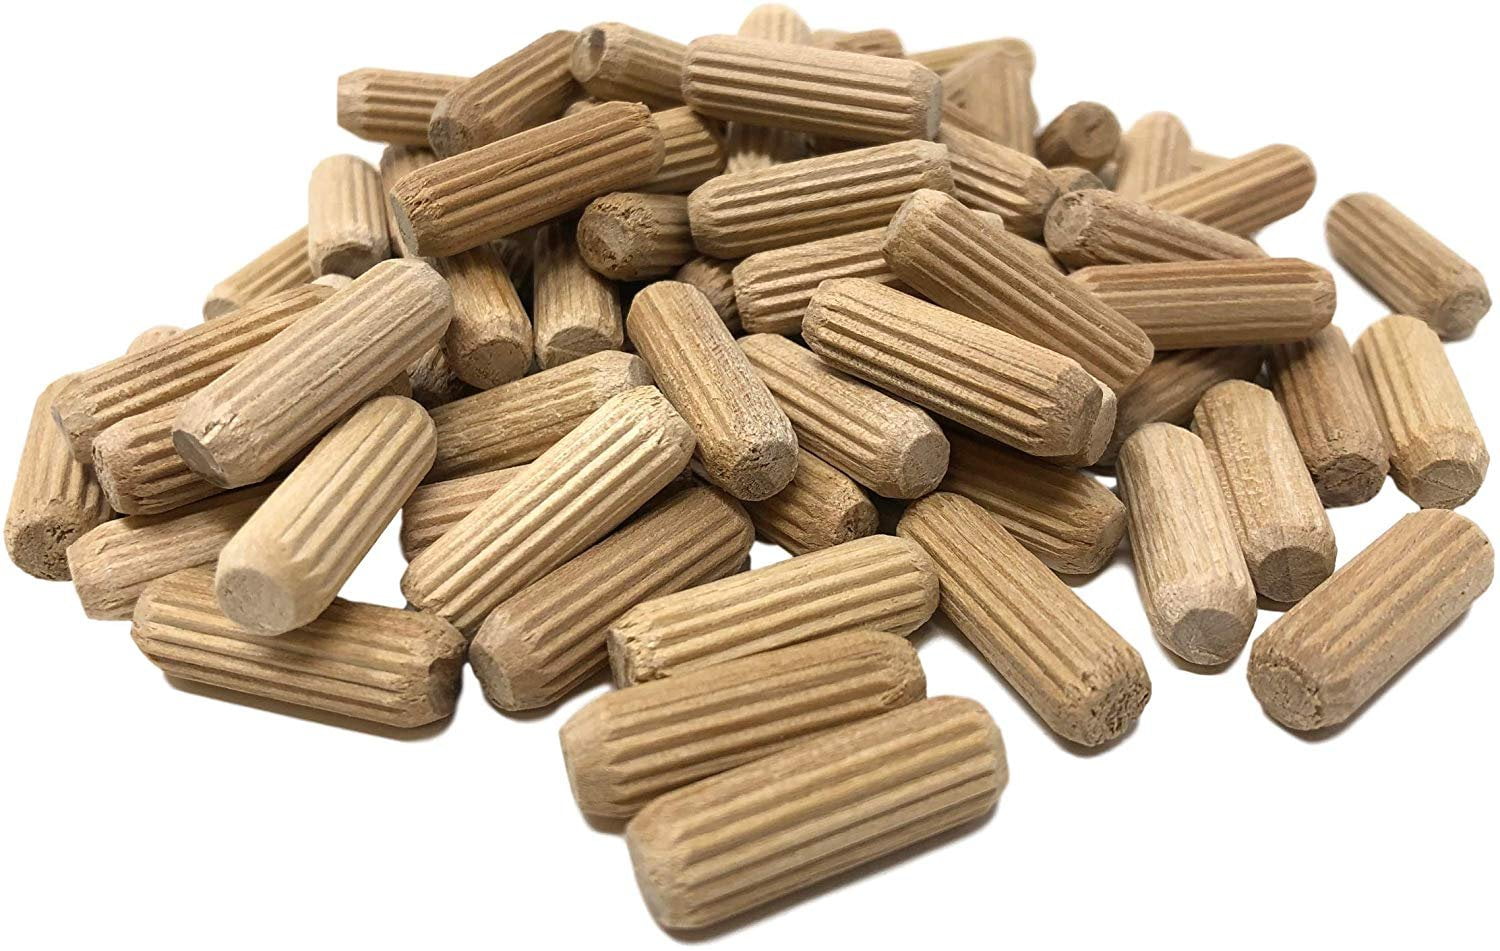 100 Pc Wooden Dowel Pins Wood Kiln Dried Fluted and Beveled made of Hardwood; 